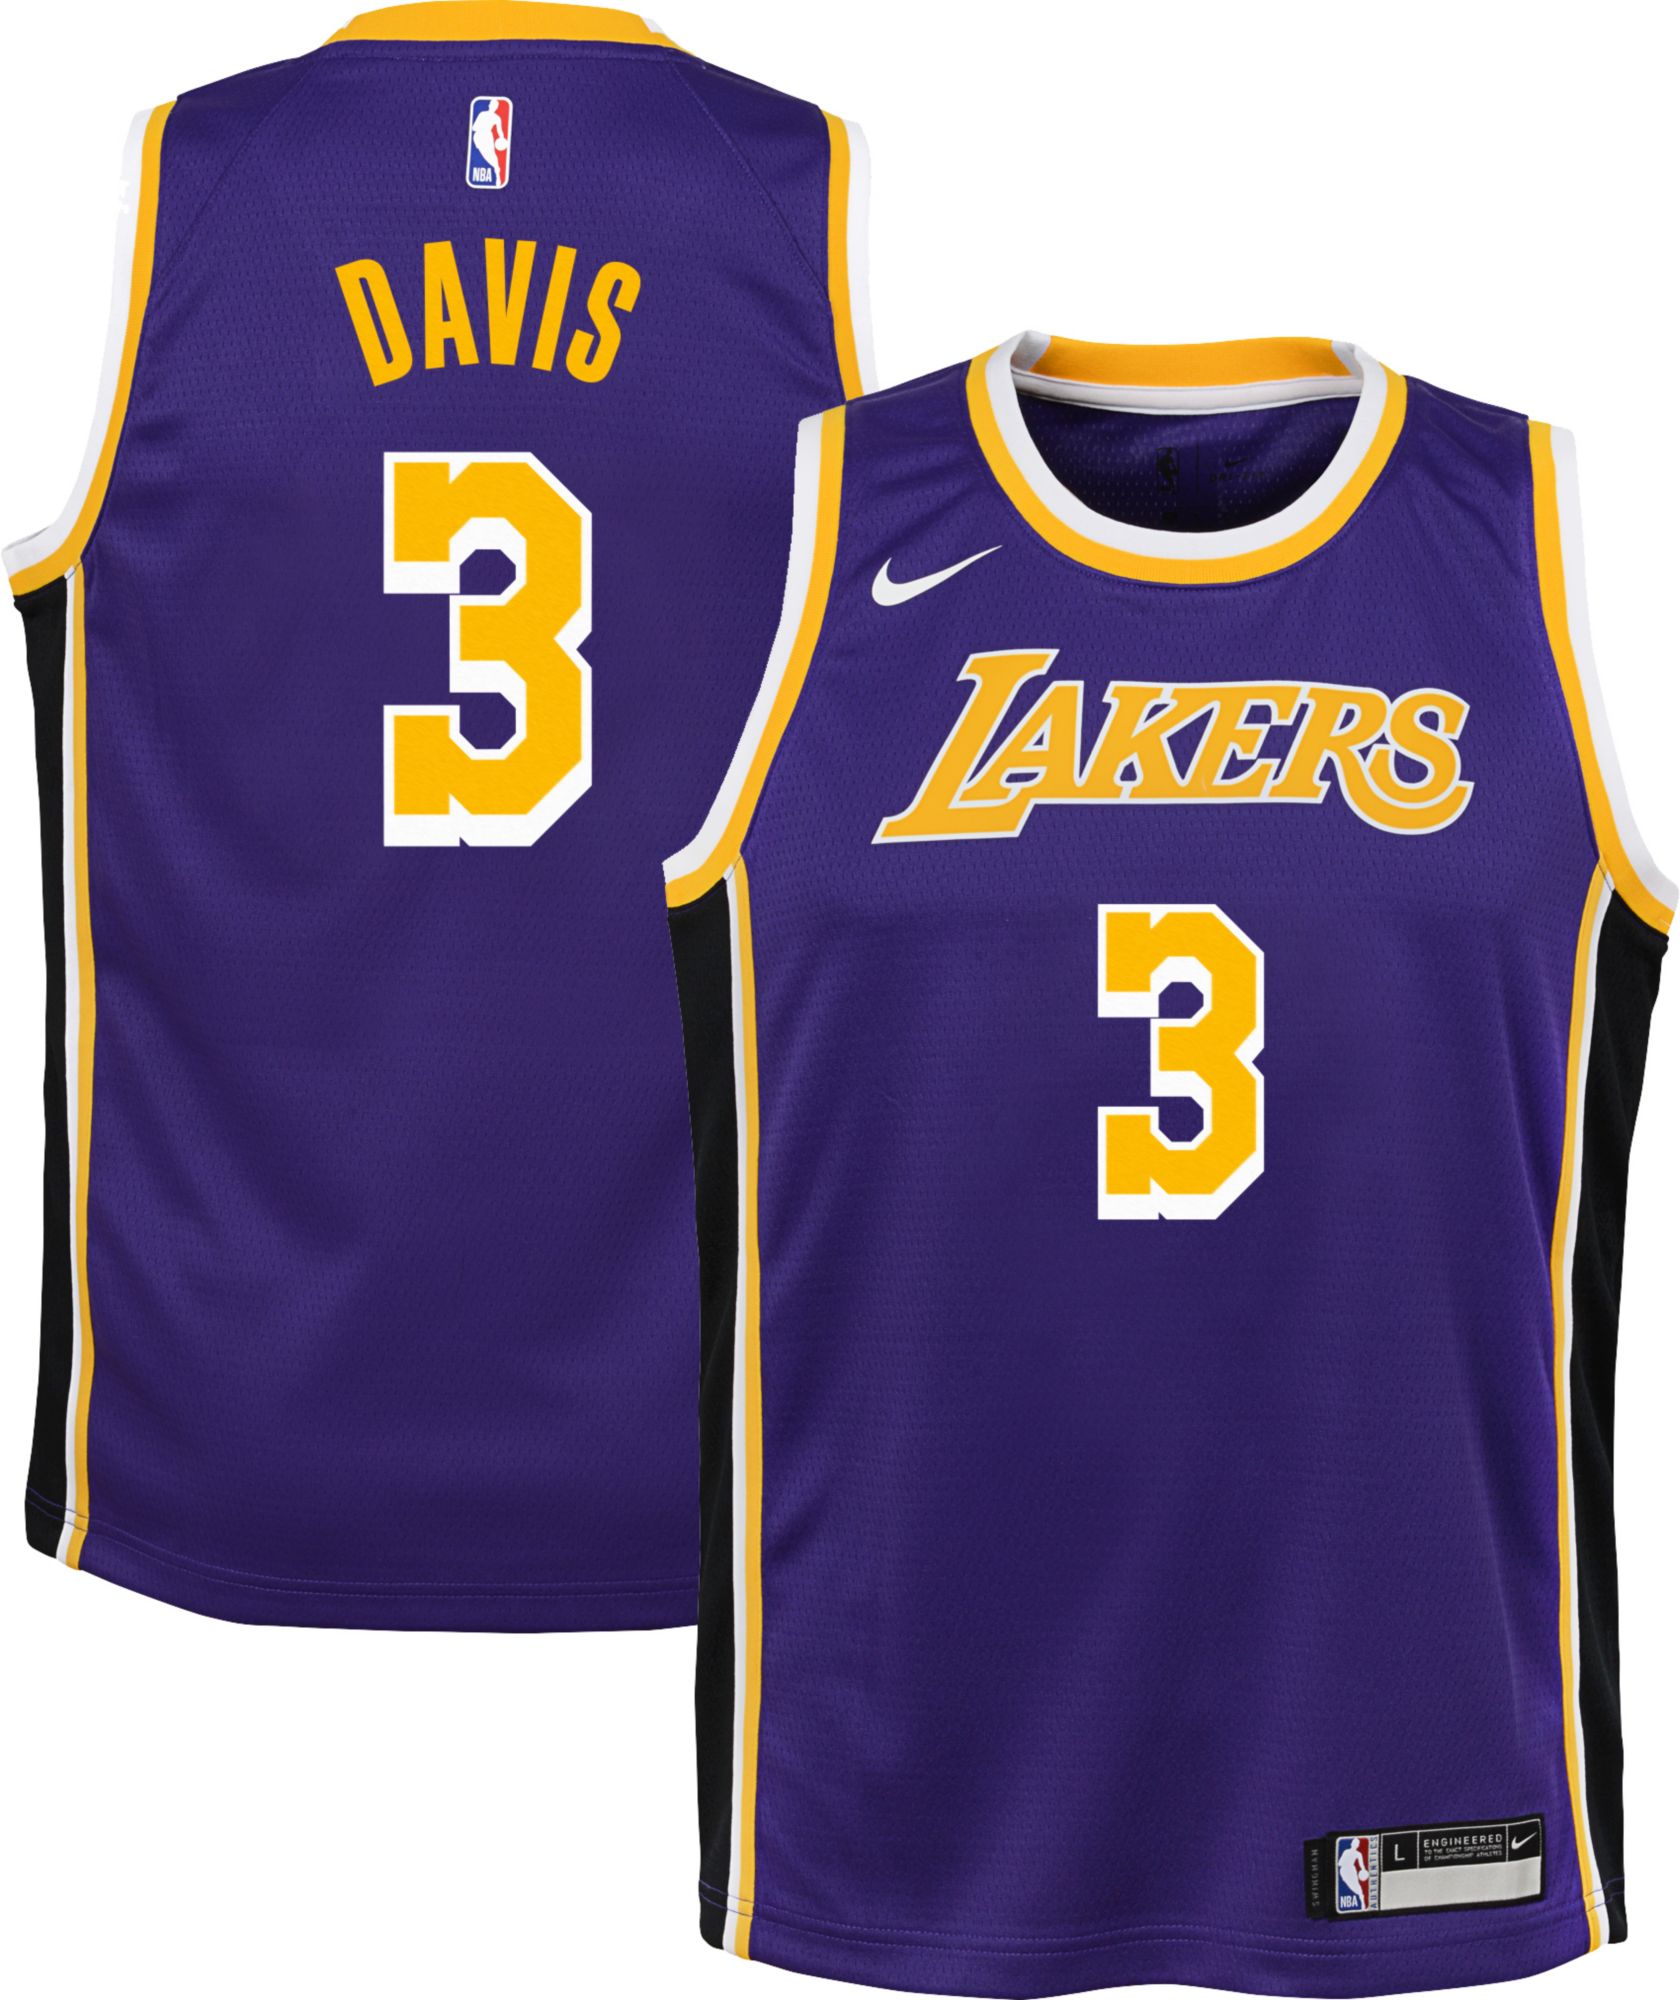 anthony davis youth jersey Off 65% - www.bashhguidelines.org